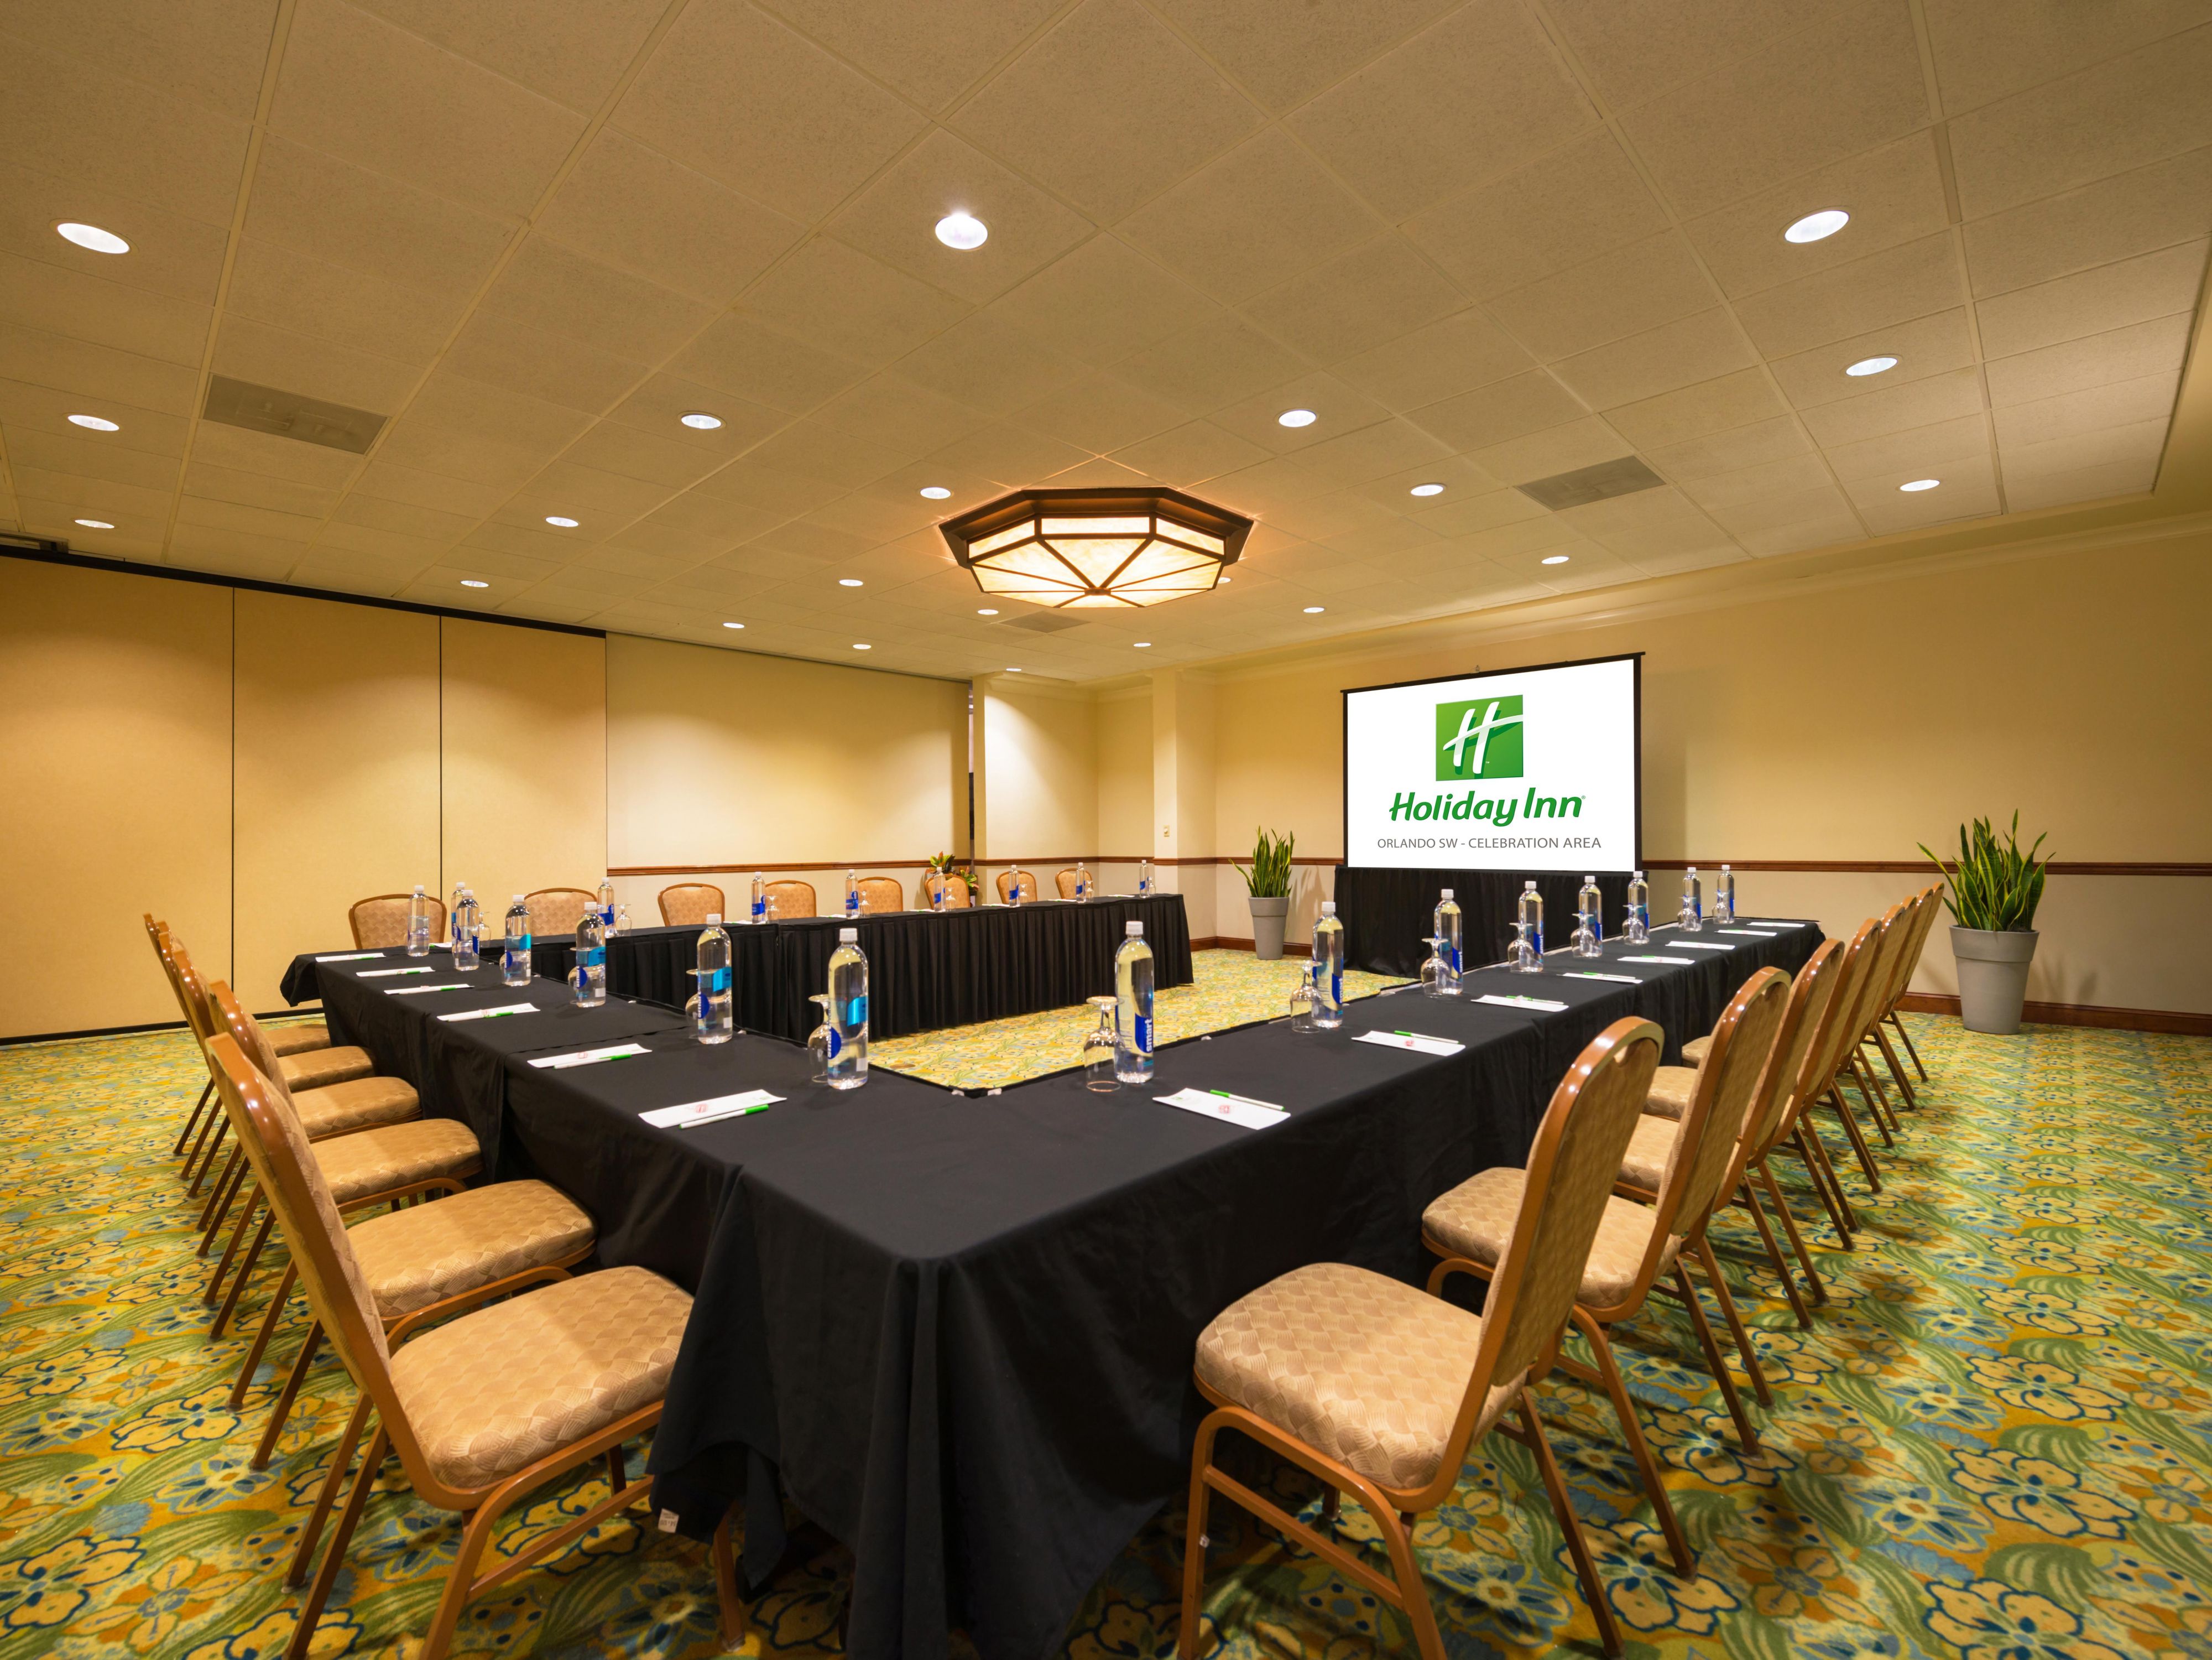 Host your Orlando event in our four flexible meeting spaces, including a chic ballroom for up to 250 guests. With top-notch audiovisual equipment, 24-hour business center, free Wi-Fi, and catering services, we go above and beyond to bring your vision to life in an atmosphere that fosters genuine connections and vibrant celebrations.